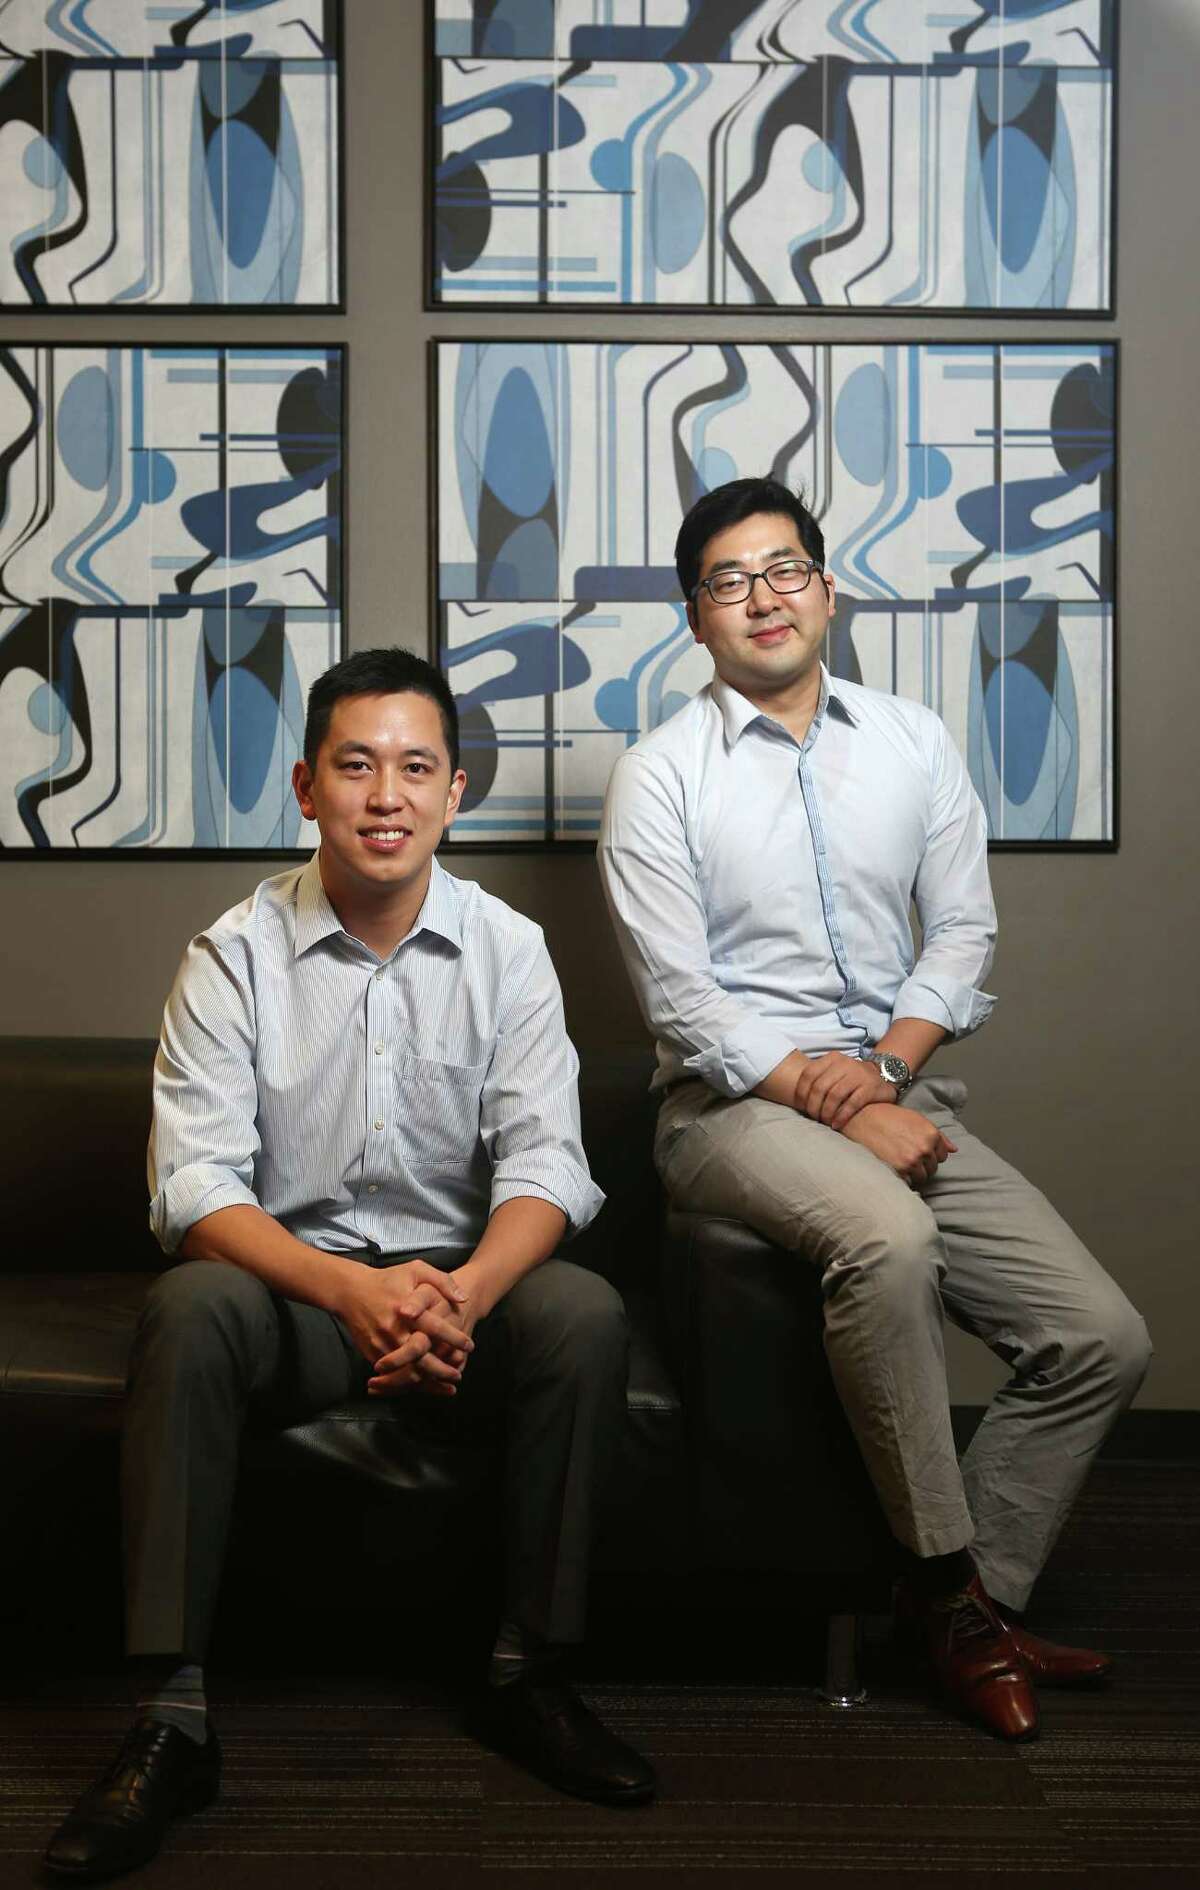 Abraham Chu and Youngro Lee are co-founders of NextSeed. Their crowdfunding platform, based in Houston, will help small businesses raise capital through revenue-sharing loans.﻿